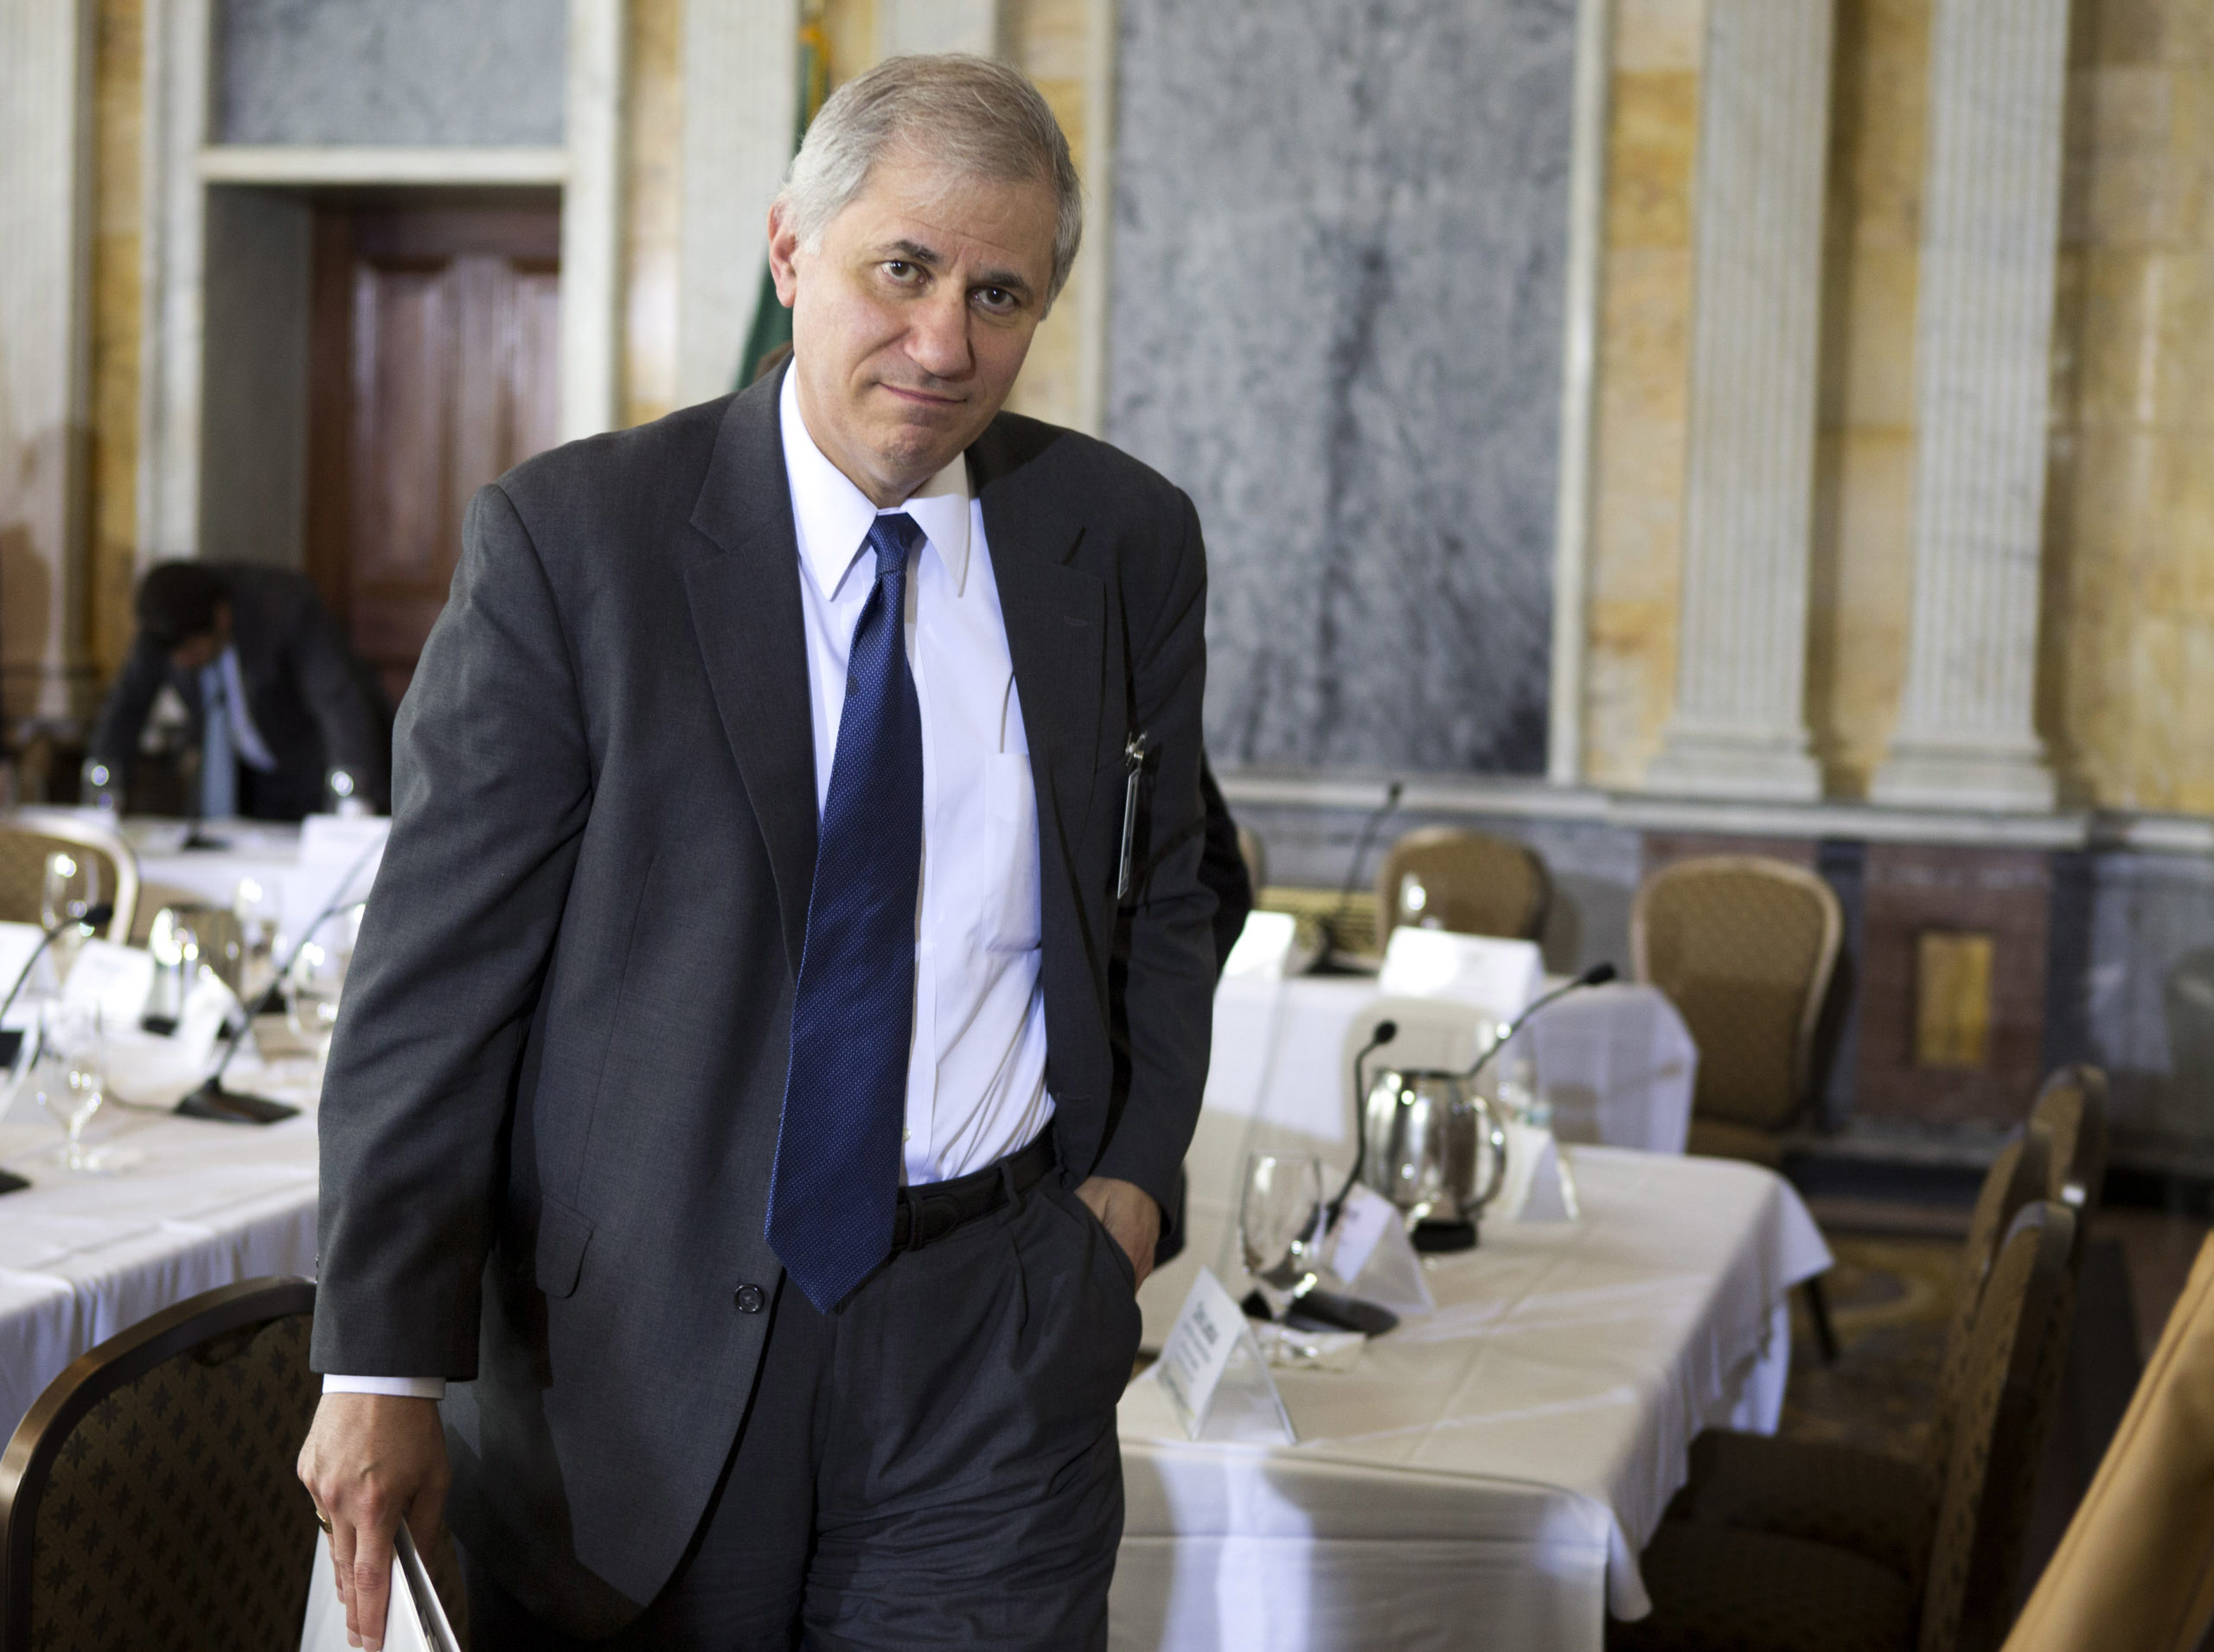 Martin Gruenberg, acting chairman of the Federal Deposit Insurance Corp., departs a meeting of the Financial Stability Oversight Council in Washington April 3, 2012. REUTERS/Joshua Roberts (UNITED STATES - Tags: POLITICS)